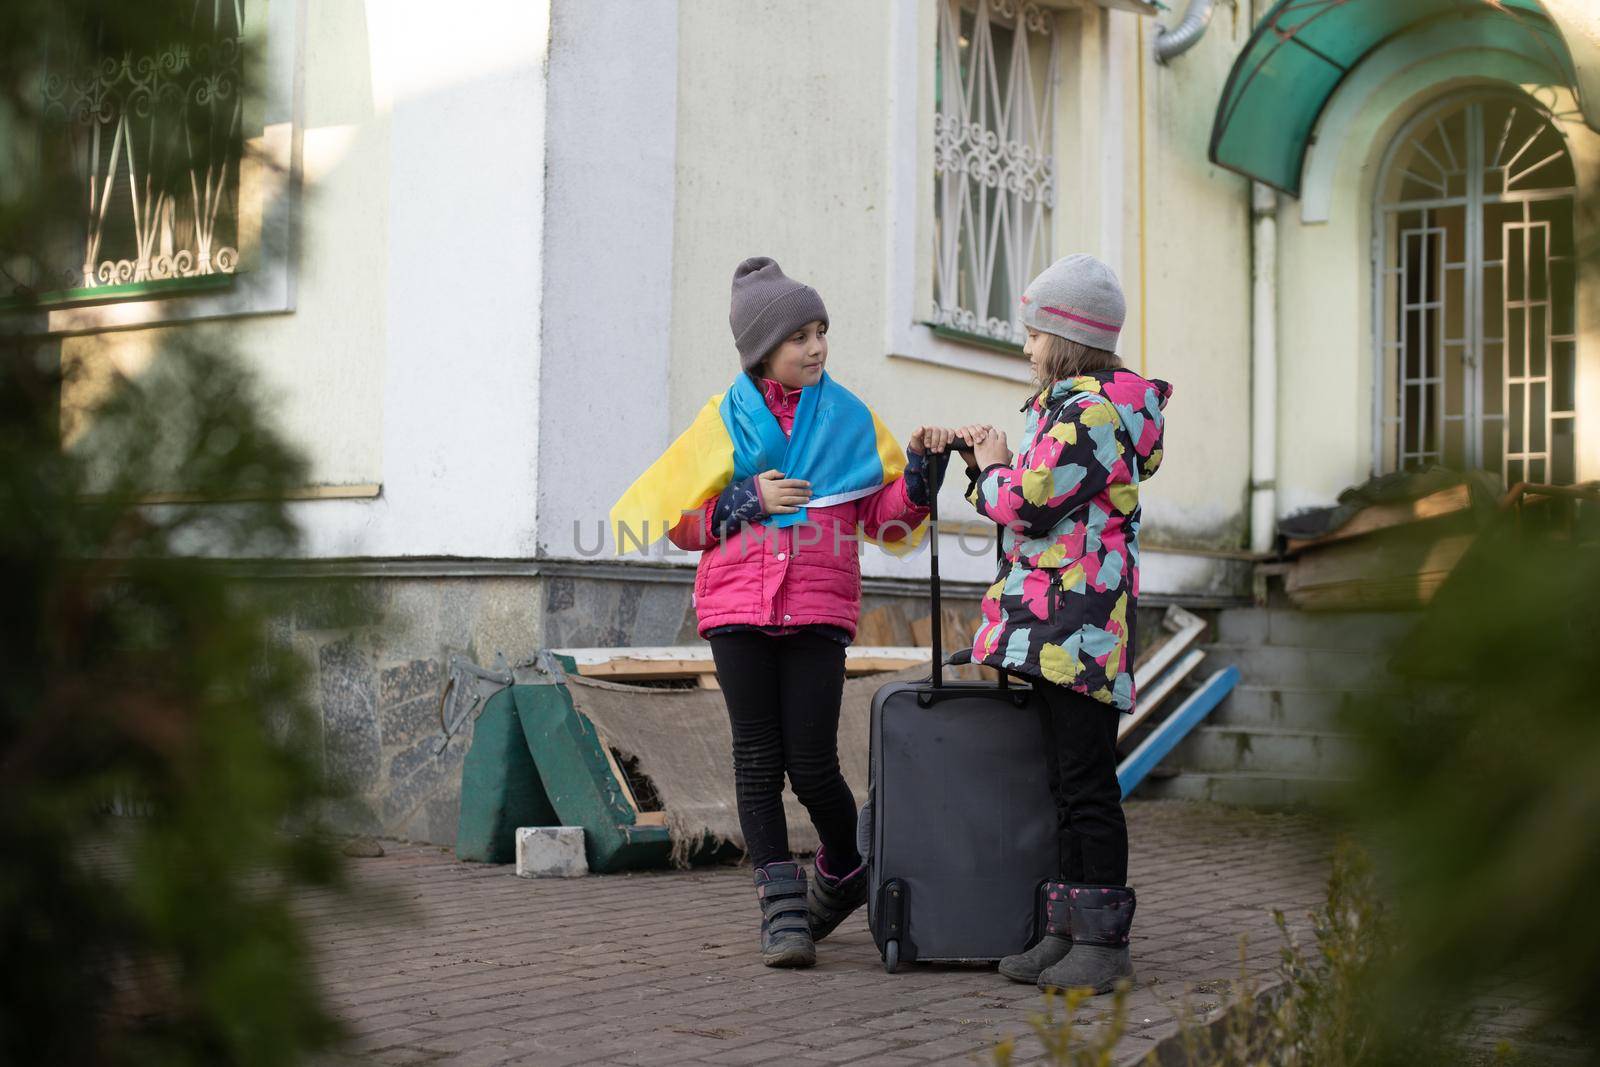 Ukraine military migration. two little girls with a suitcase. Flag of Ukraine, help. Crisis, military conflict by Andelov13